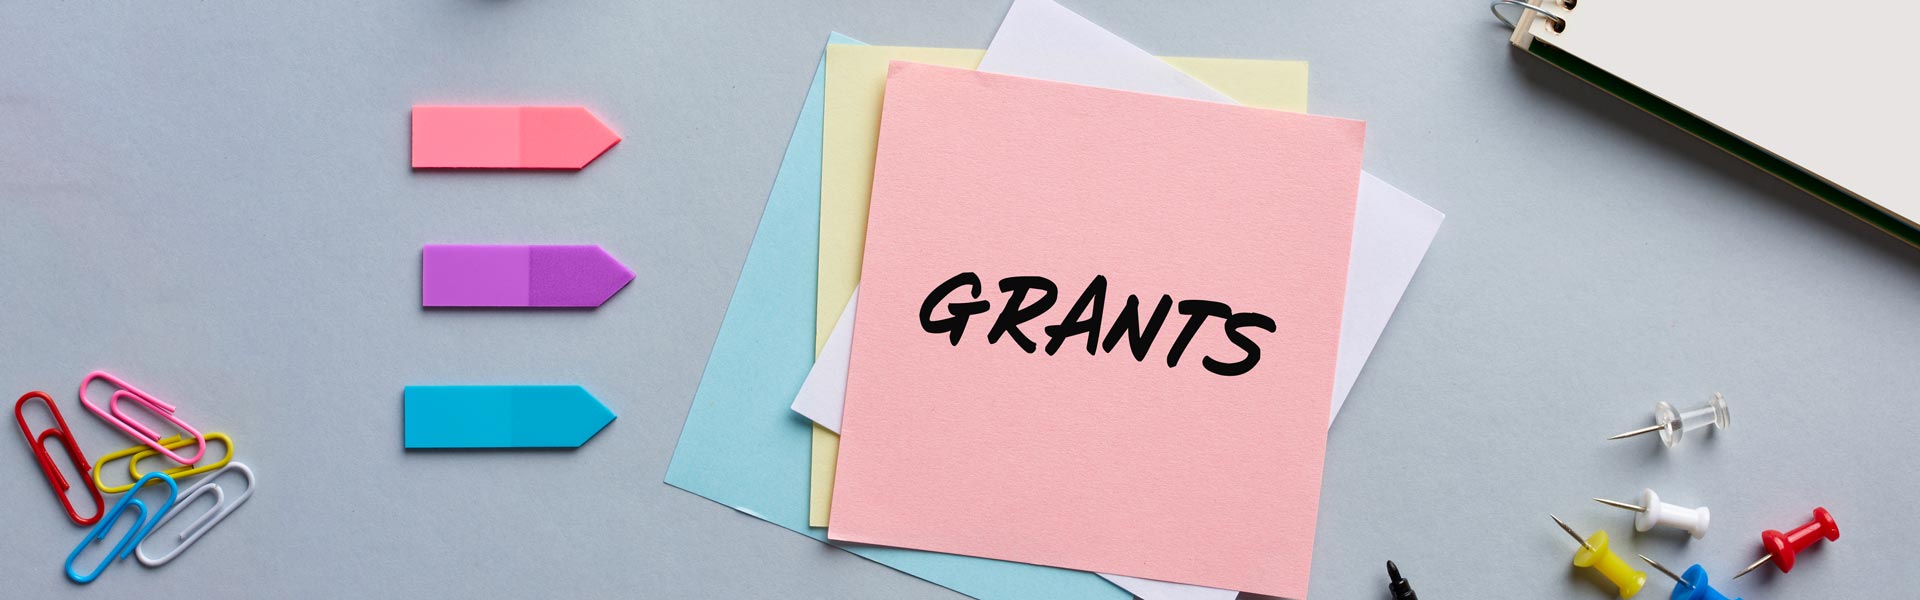 Office supplies and post-it with "Grants" written on it